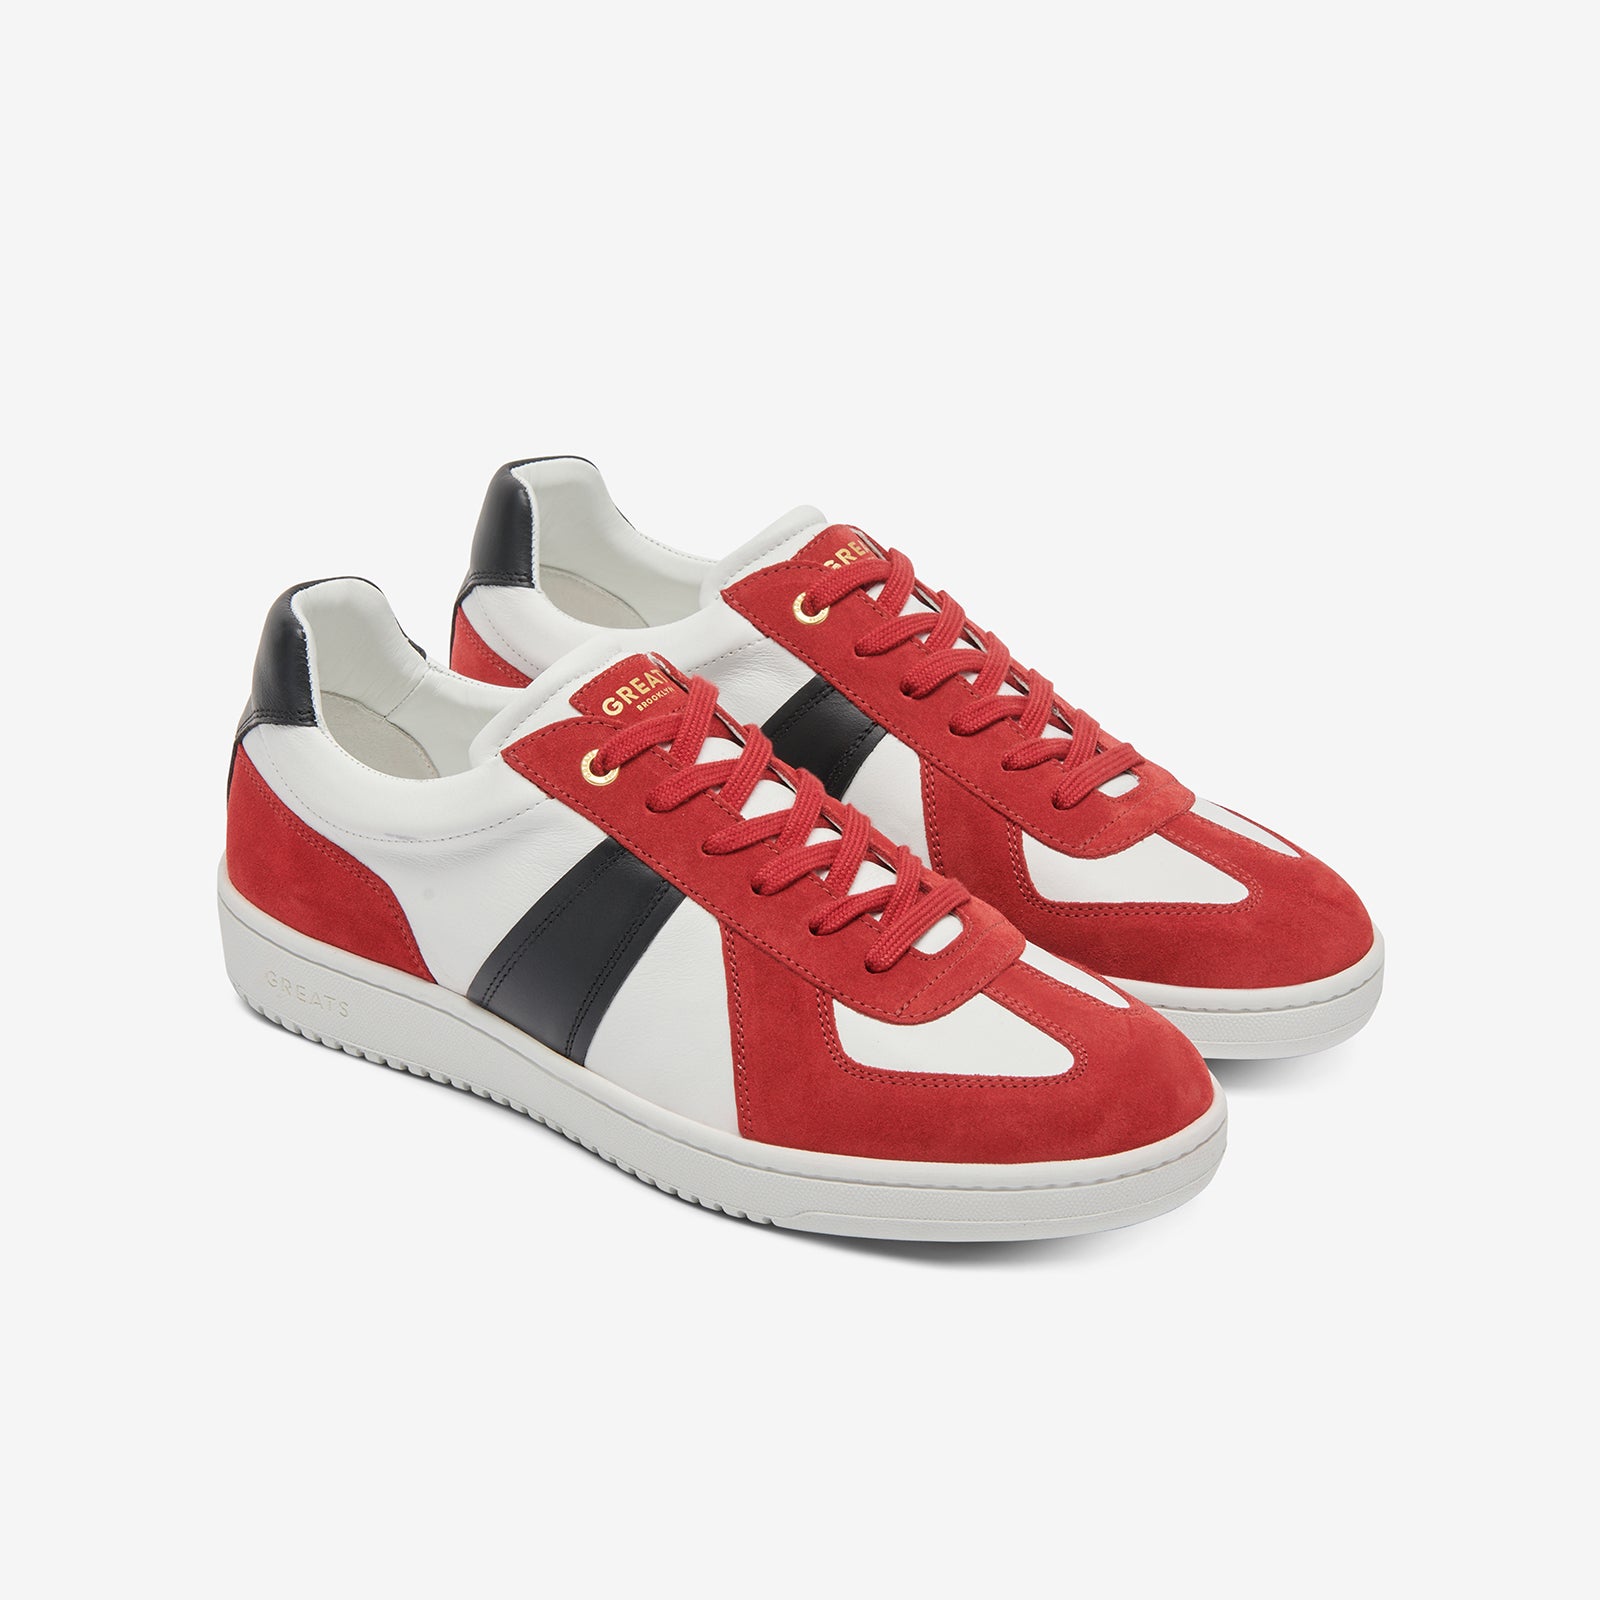 The GAT Sneaker - Red